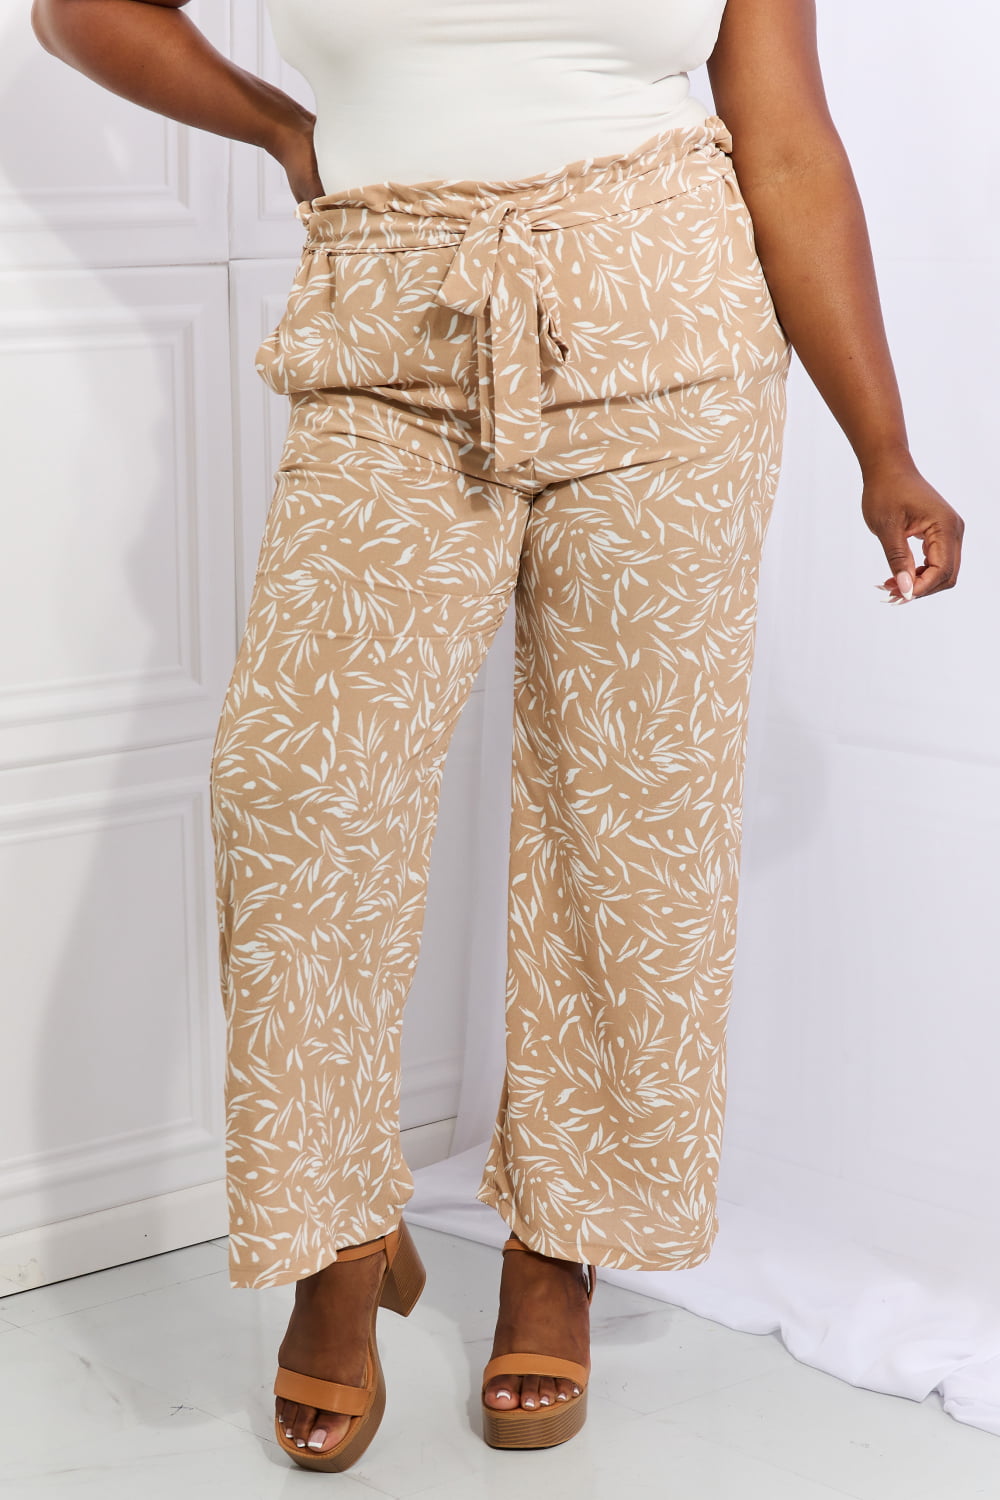 The Right Angle Full Size Geometric Printed Pants in Tan